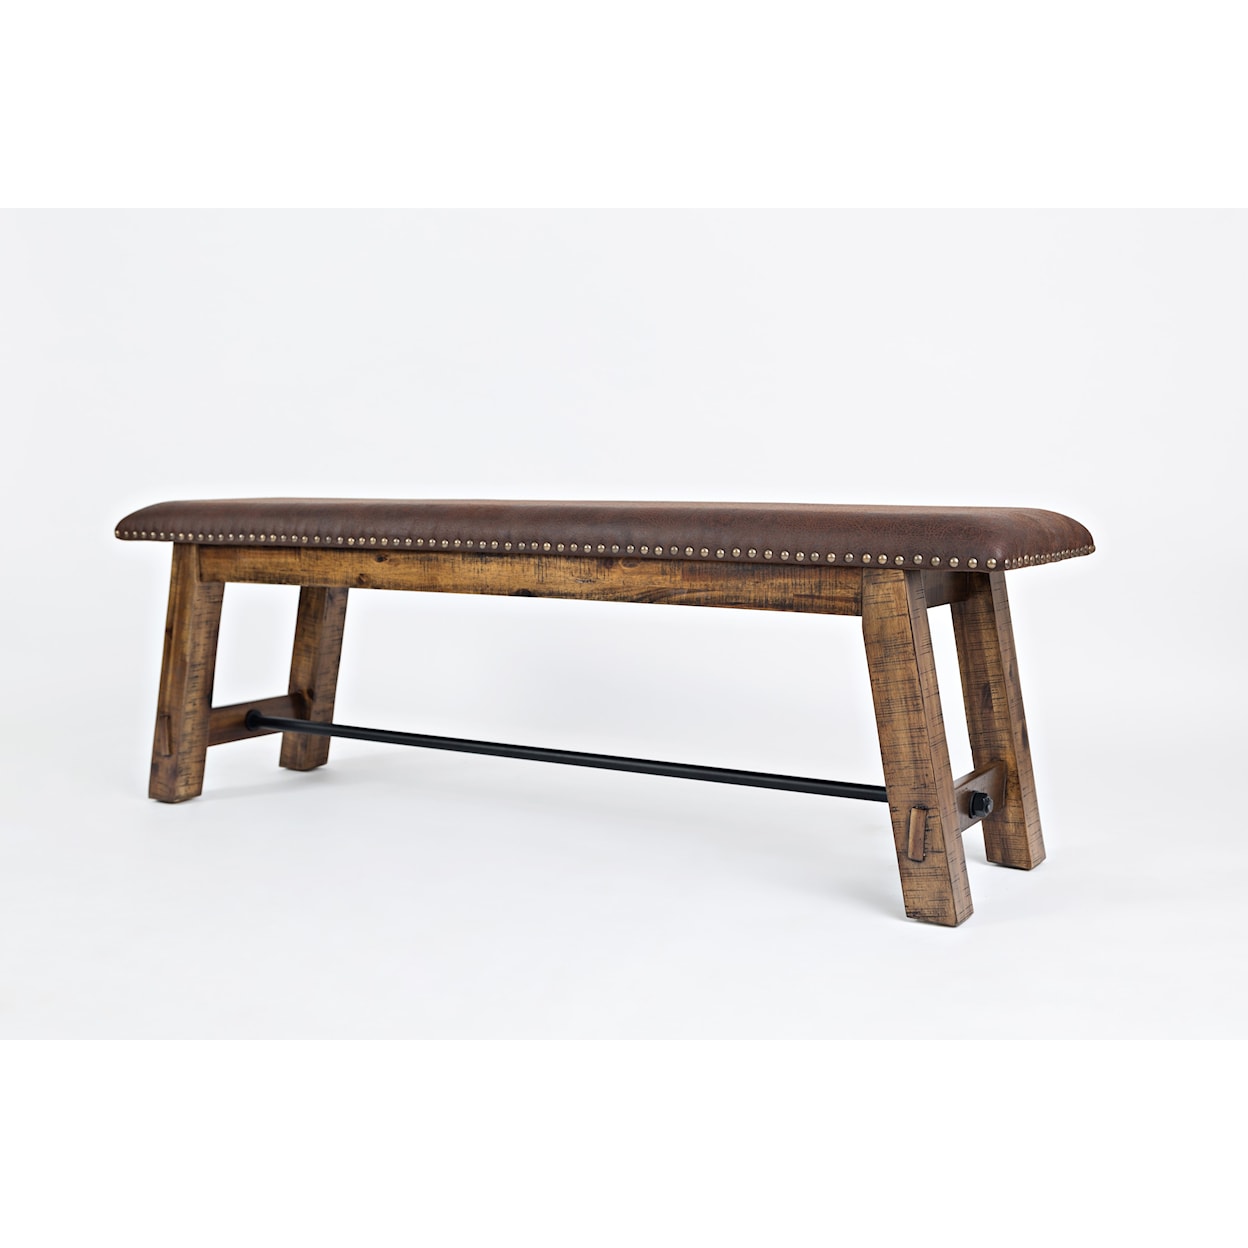 Jofran Cannon Valley Bench with Upholstered Seat